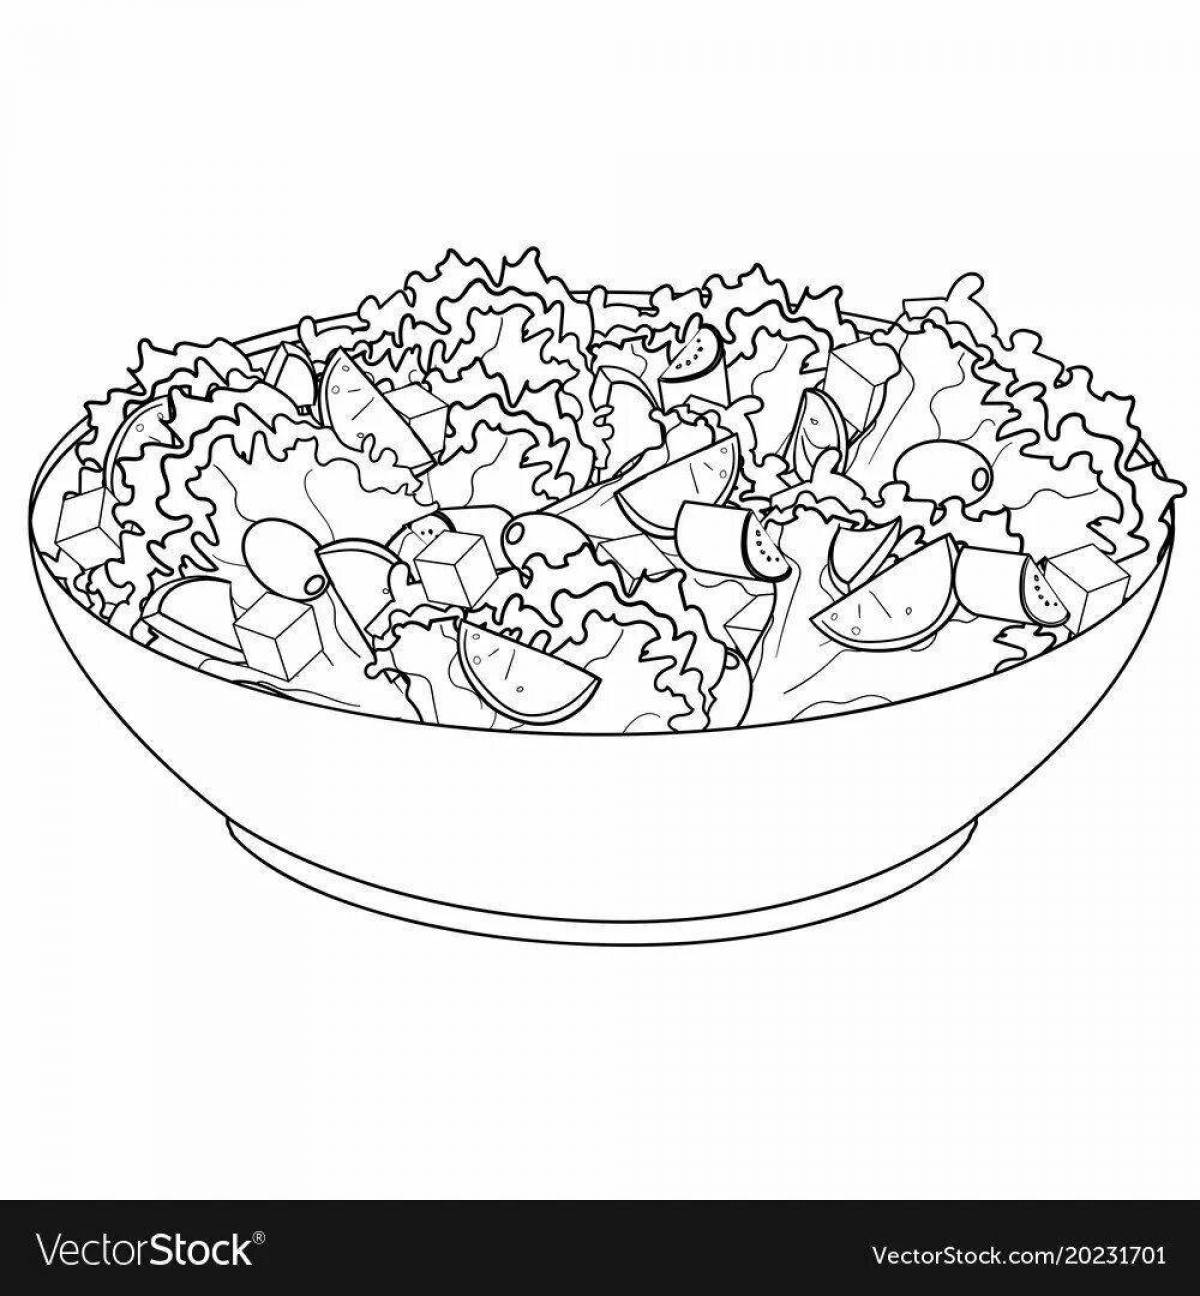 Coloring page cheerful vegetable salad